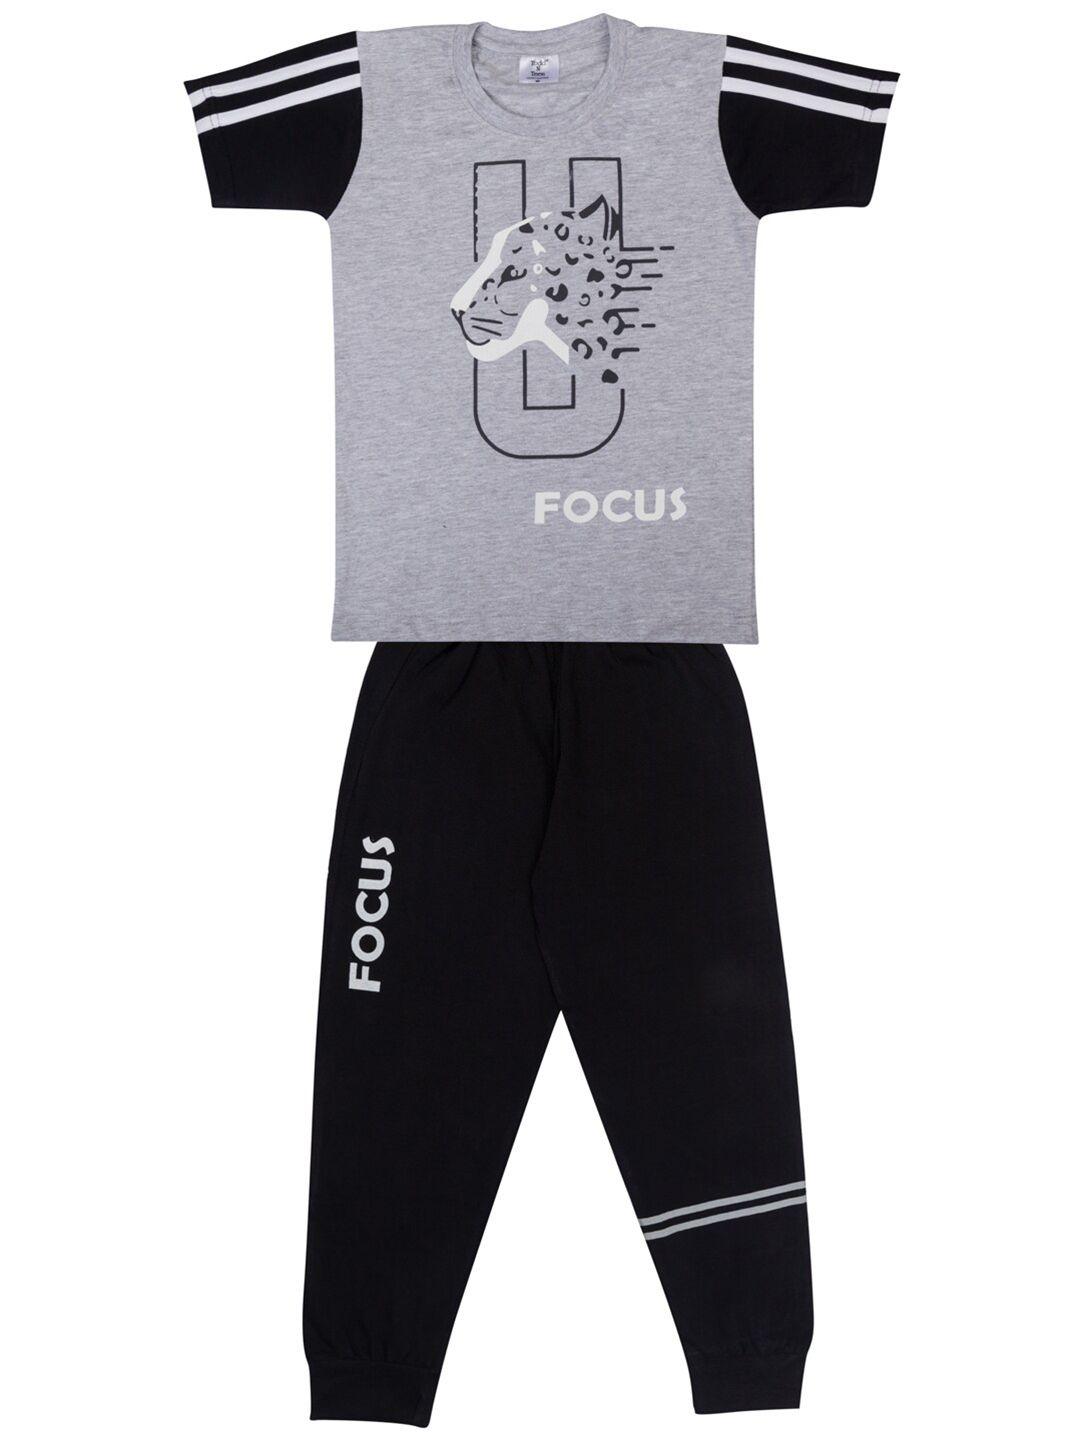 Todd N Teen Boys Grey & Black Printed Pure Cotton T-shirt with Trousers